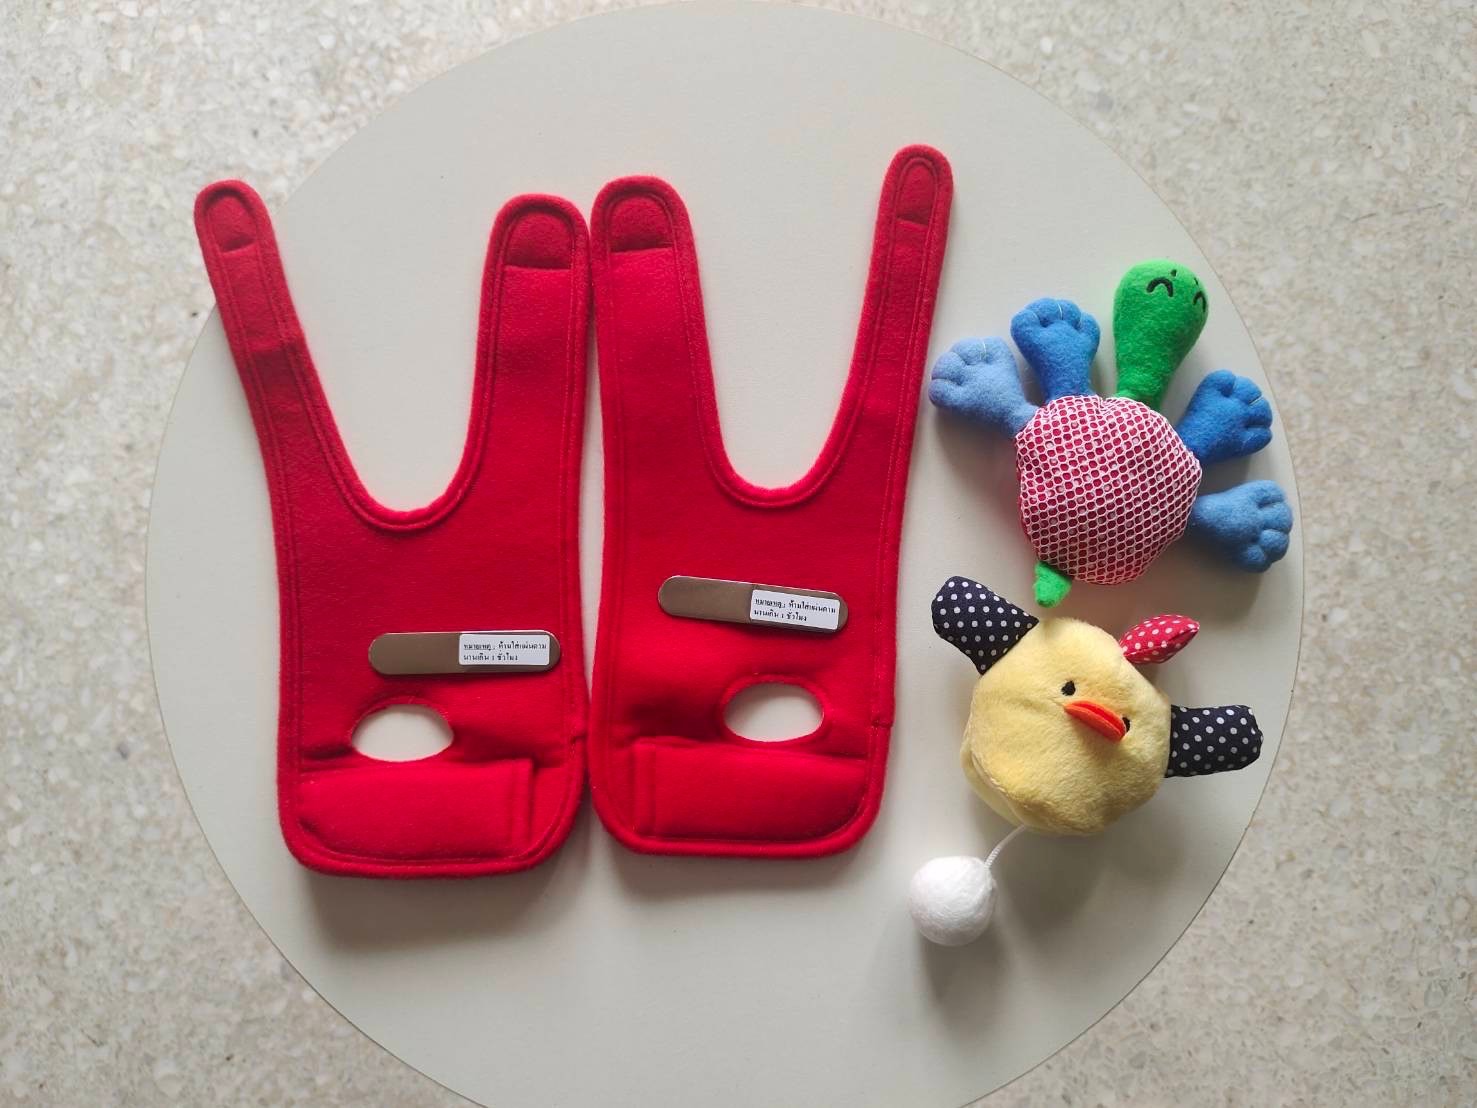 Happy CP Gloves by Satit Chula Demonstration Students Win First Prize in Student Innovation Contest for People with Disabilities and the Elderly